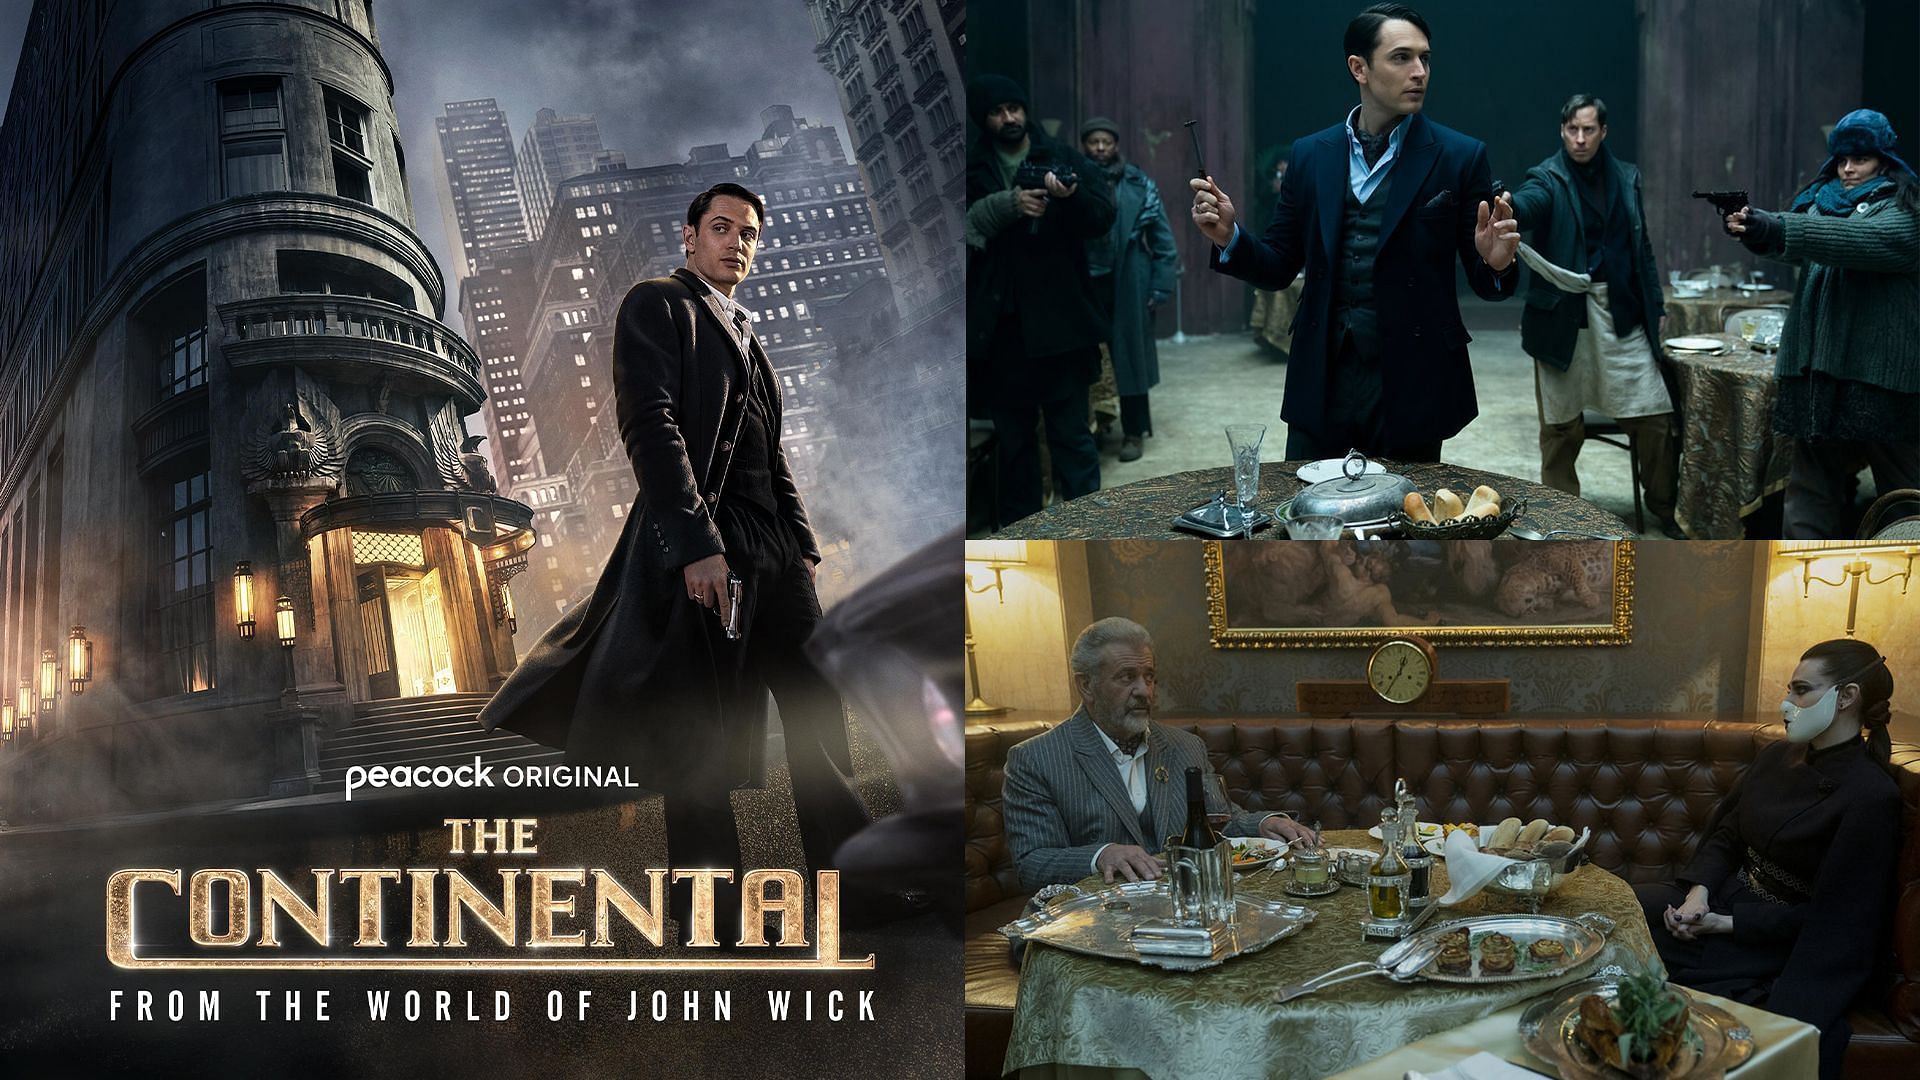 The Continental: From the World of John Wick - streaming